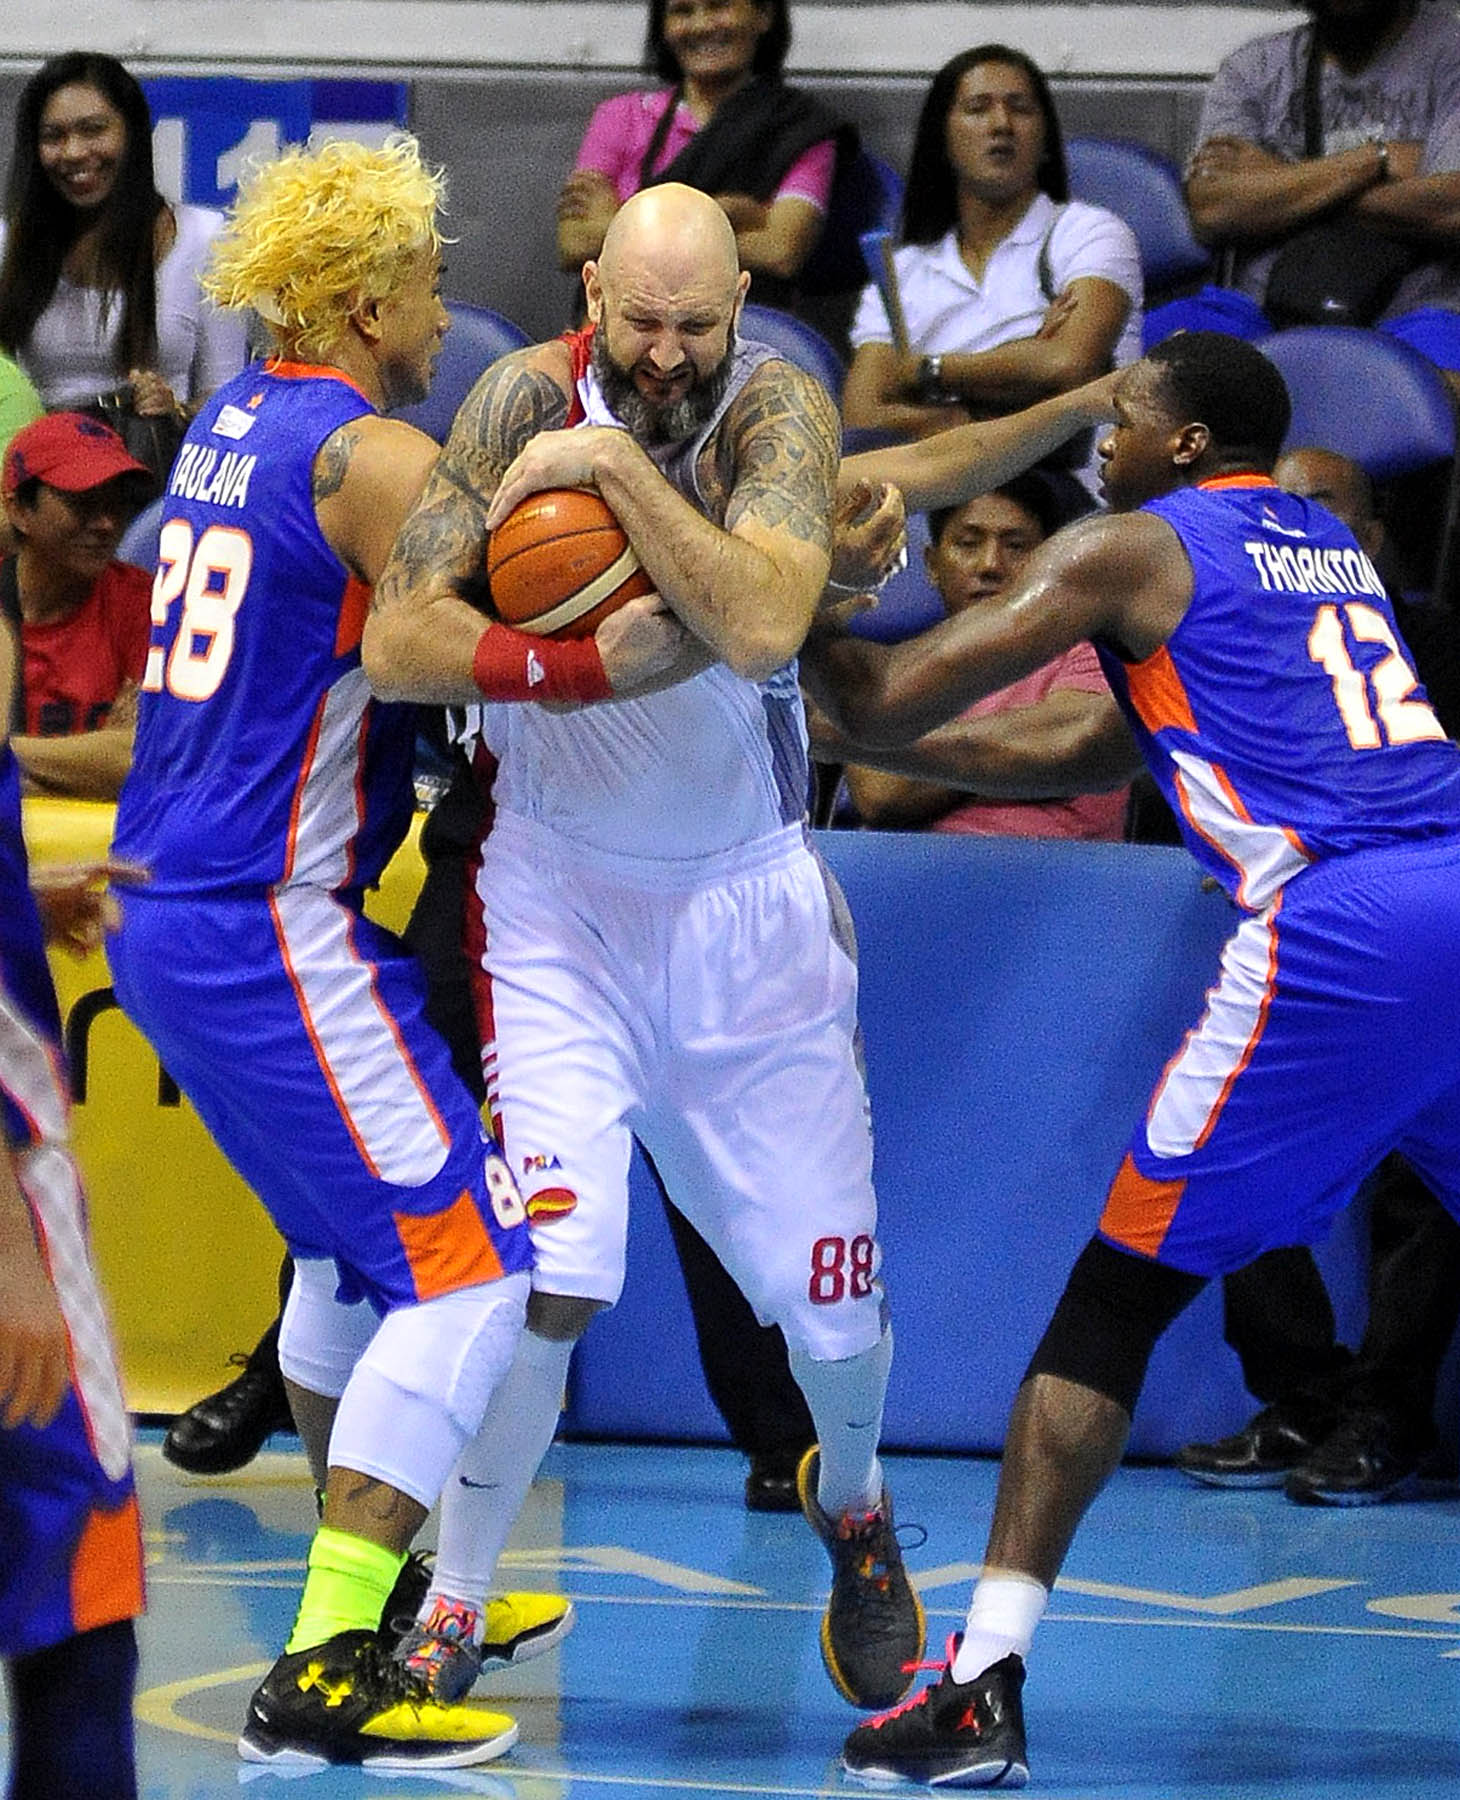 OLD RELIABLES STILL AT IT Veteran centerMick Pennisi (right) of new team Phoenix collars the rebound againstNLEX counterpart Asi Taulava in last night’s game. AUGUST DELA CRUZ